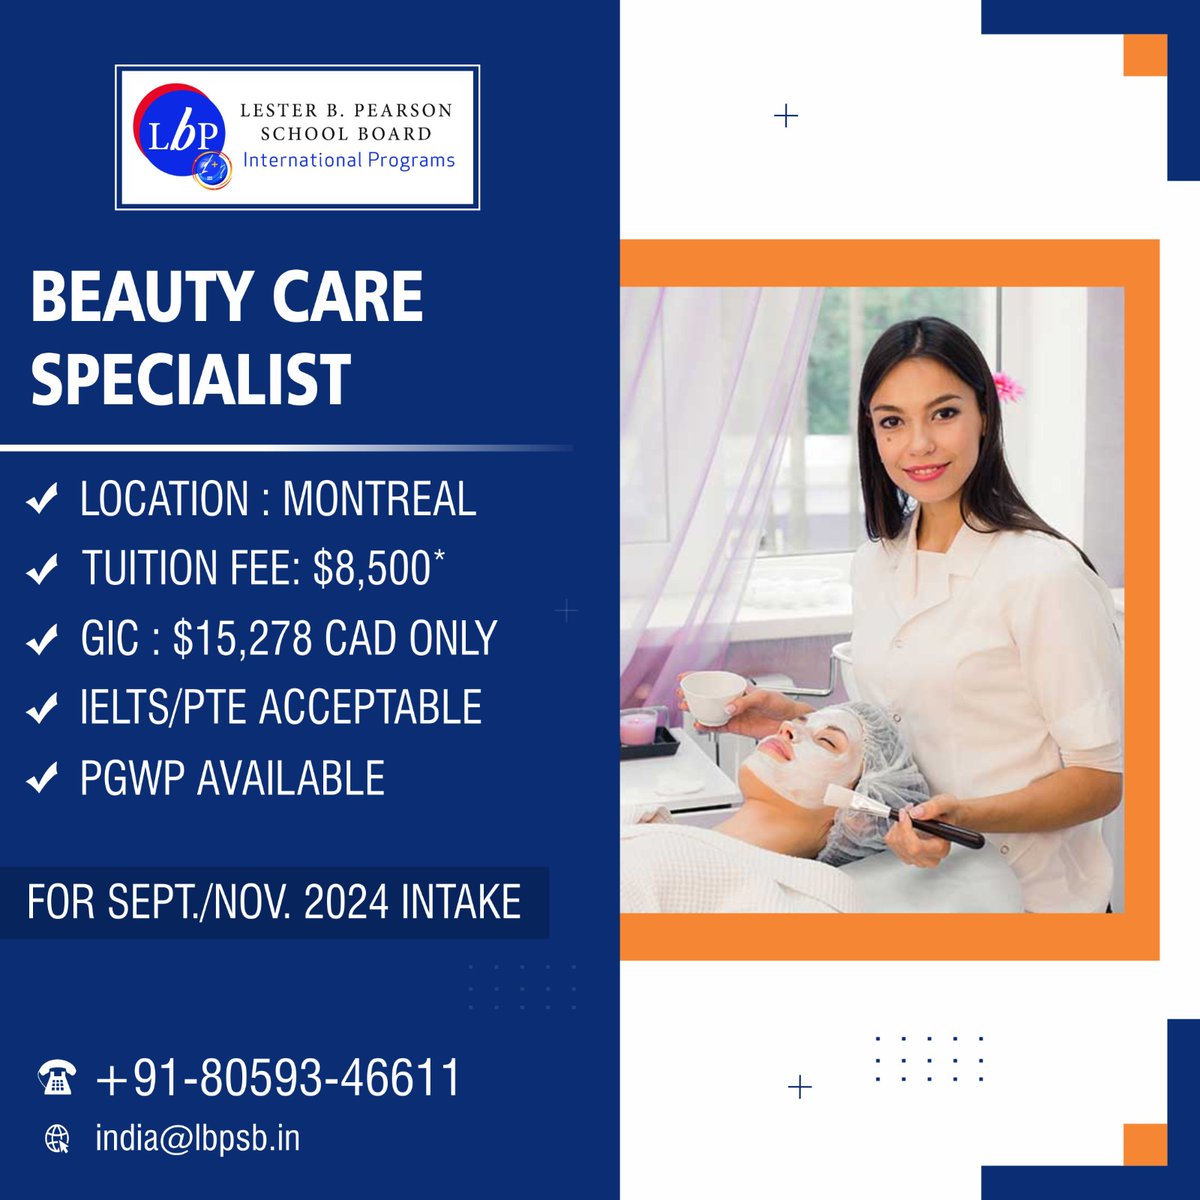 📷 Lester B Pearson School Board

📷PROGRAM: BEAUTY CARE SPECIALIST
📷LOCATION: MONTREAL
📷TUITION FEE: $8500
📷GIC: $15278 CAD Only
📷IELTS/PTE ACCEPTABLE
📷PGWP AVAILABLE

𝐑𝐄𝐒𝐄𝐑𝐕𝐄 𝐘𝐎𝐔𝐑 𝐒𝐄𝐀𝐓𝐒 𝐍𝐎𝐖📷
 #foryou #totonto #visaabroad #bhfyp #foryou #MovetoCanada